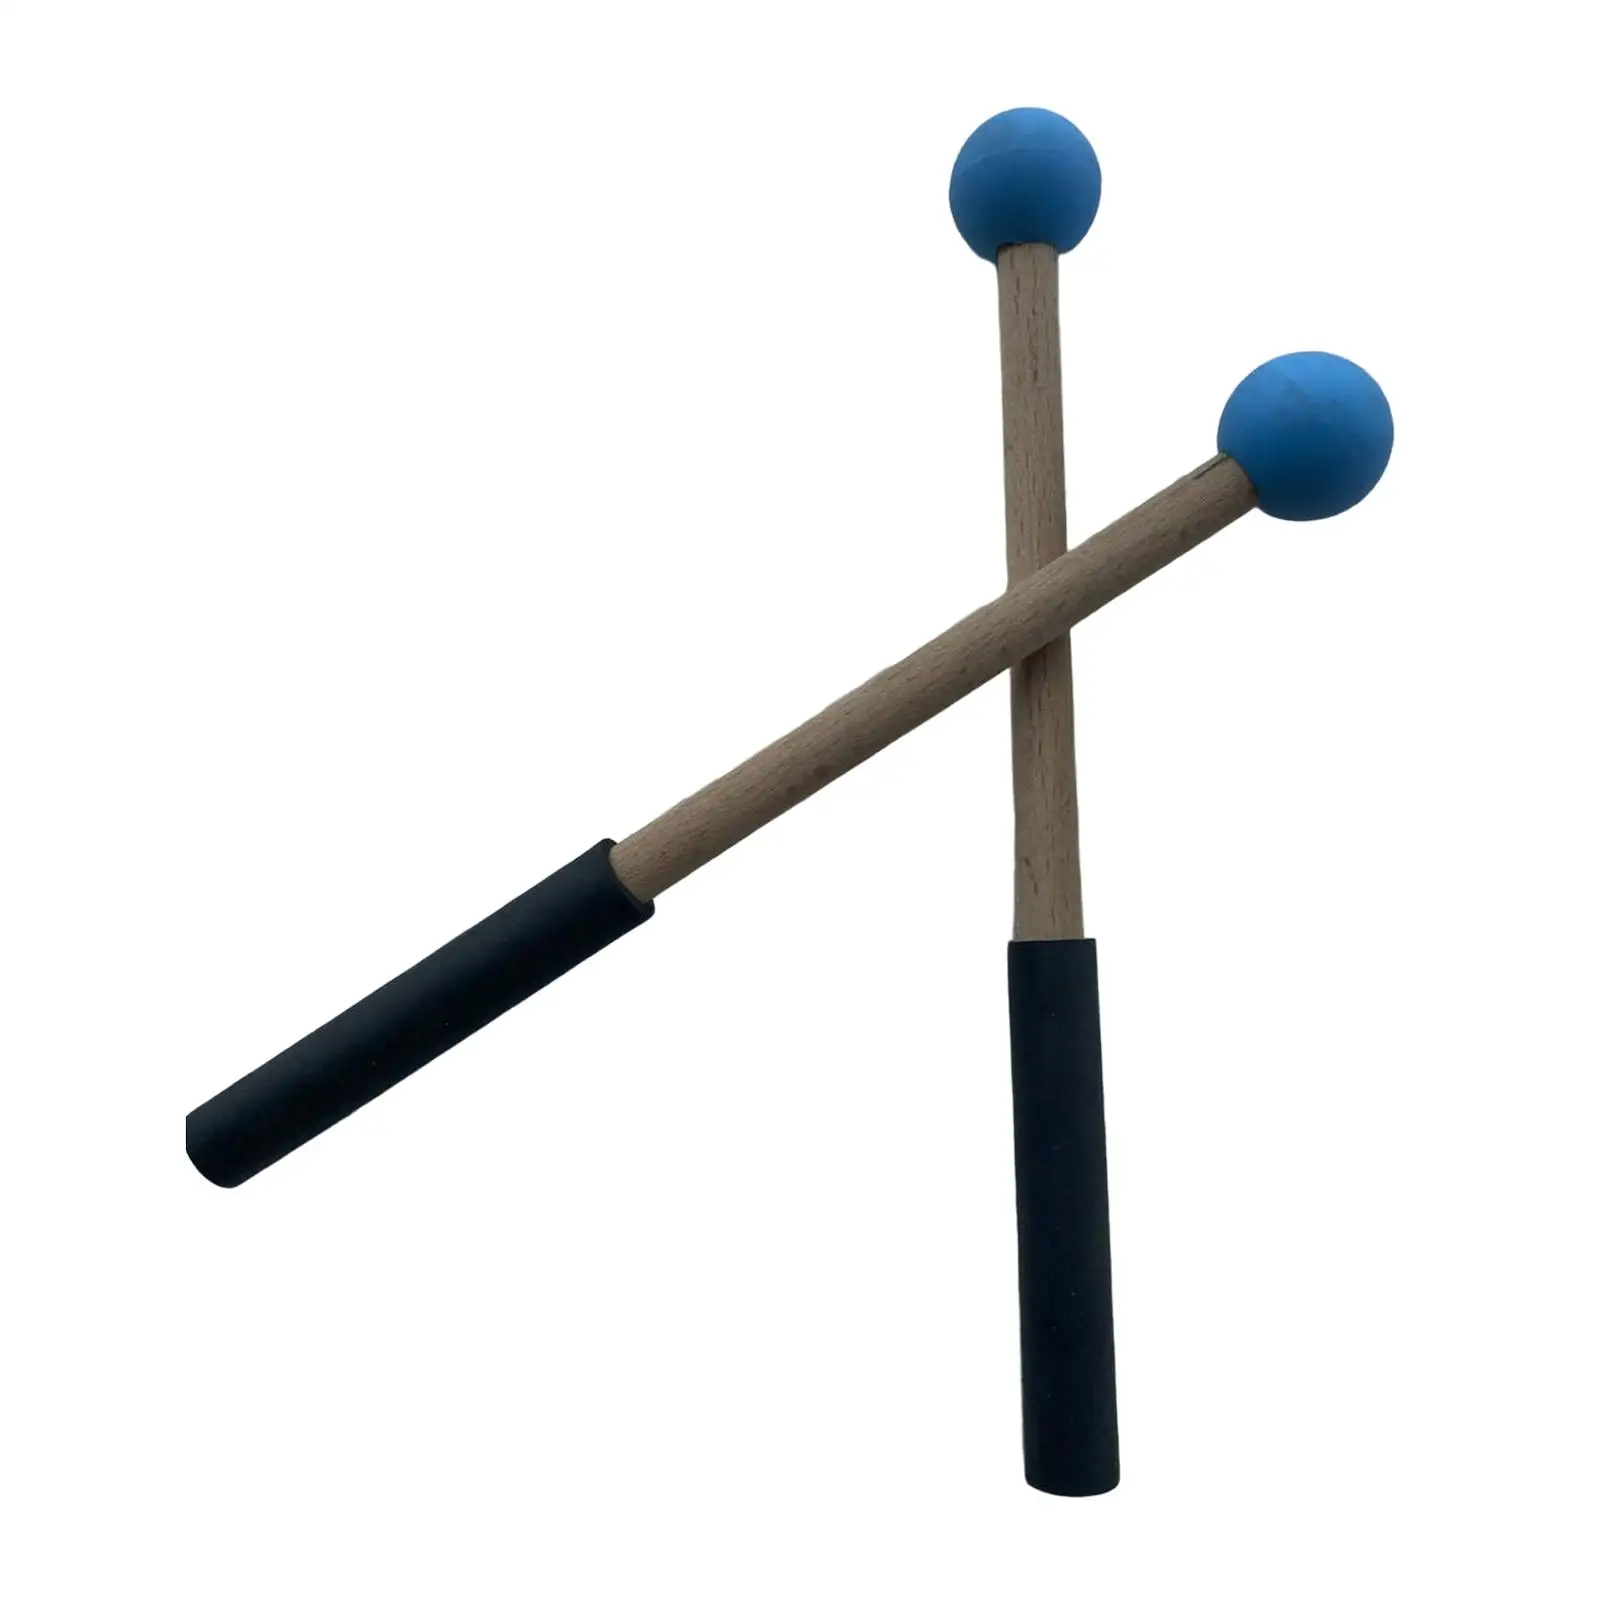 2 Pieces Classic Silicone Drumsticks Hand Percussion Mallets Cymbal Mallet